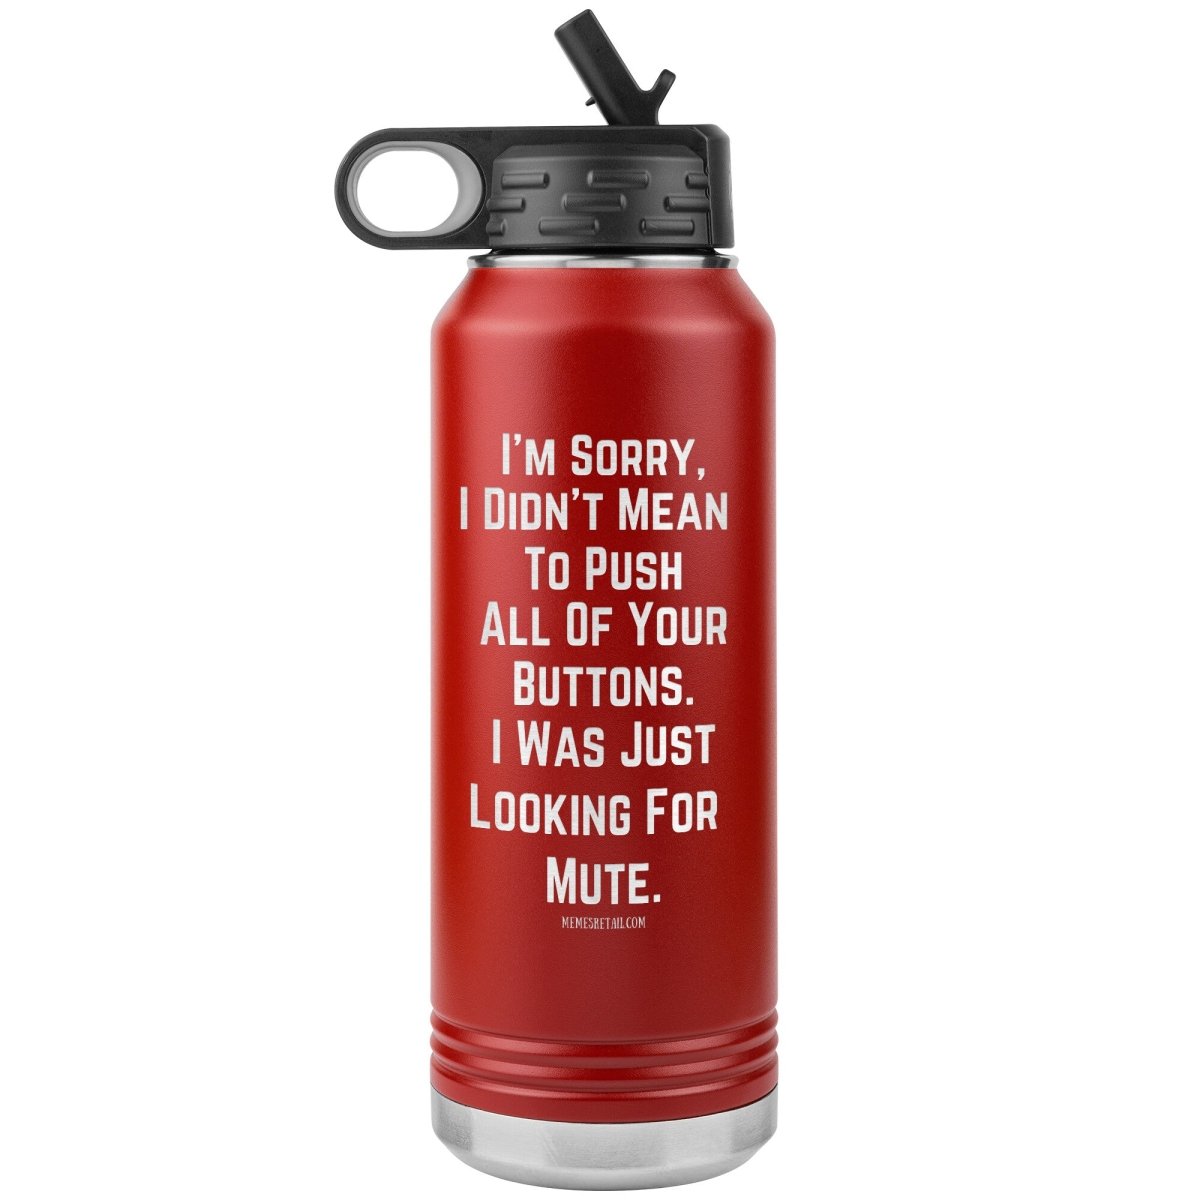 I’m sorry, I didn’t mean to push all your buttons, I was just looking for mute 32 oz water tumbler, Red - MemesRetail.com